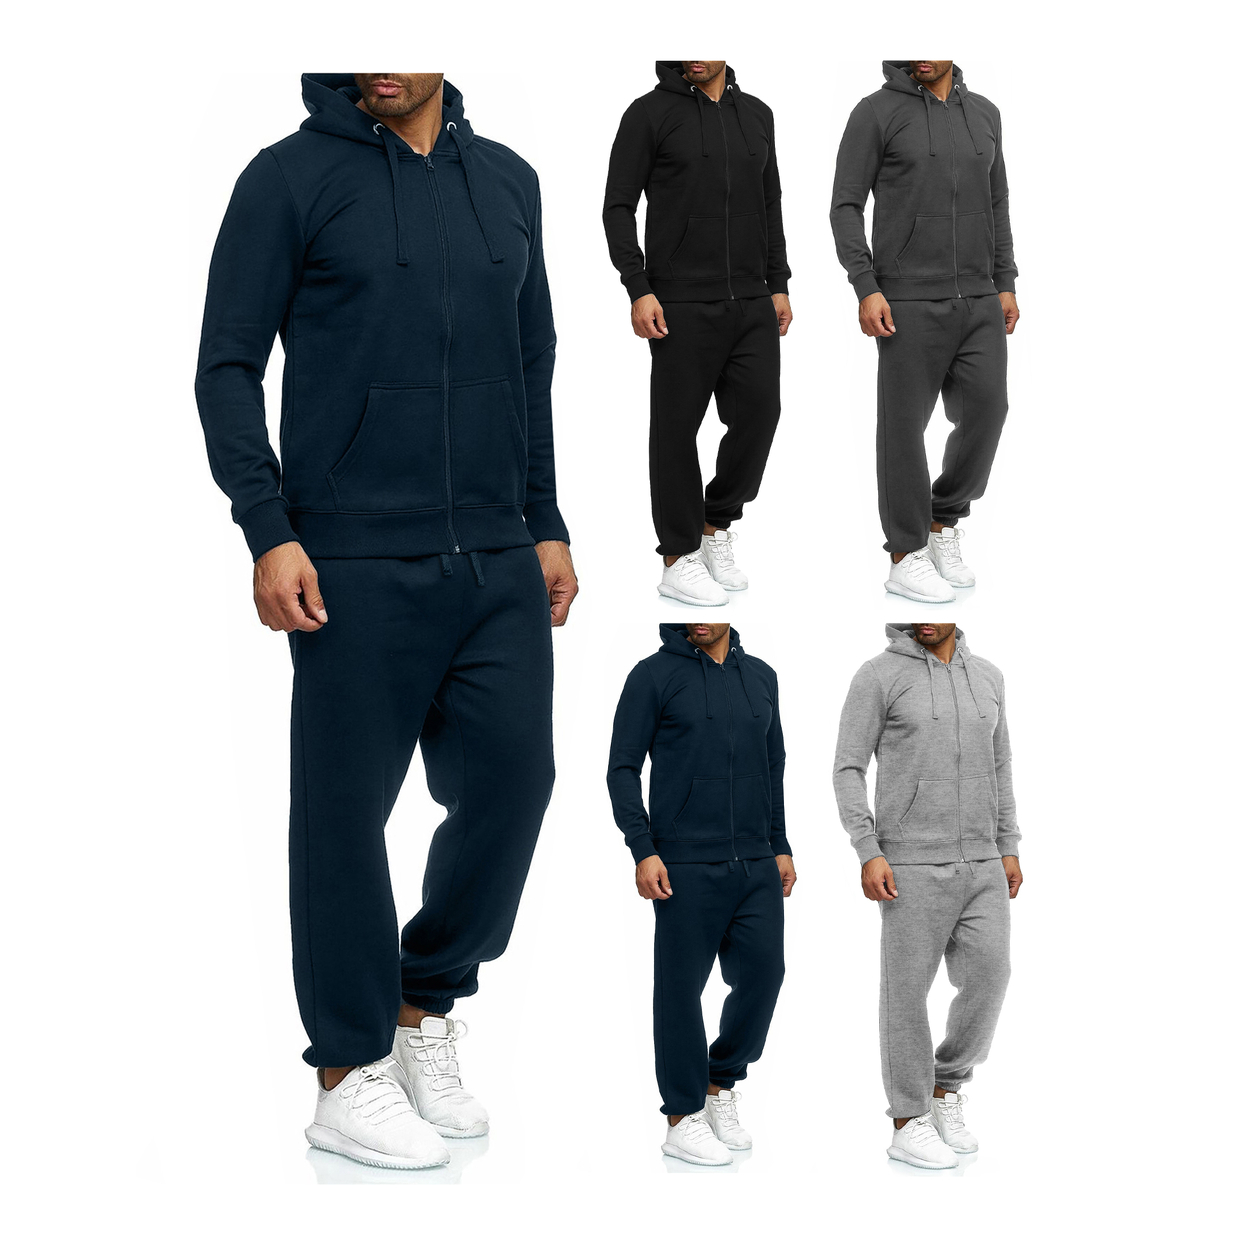 Men's Casual Big & Tall Athletic Active Winter Warm Fleece Lined Full Zip Tracksuit Jogger Set - Black, X-large